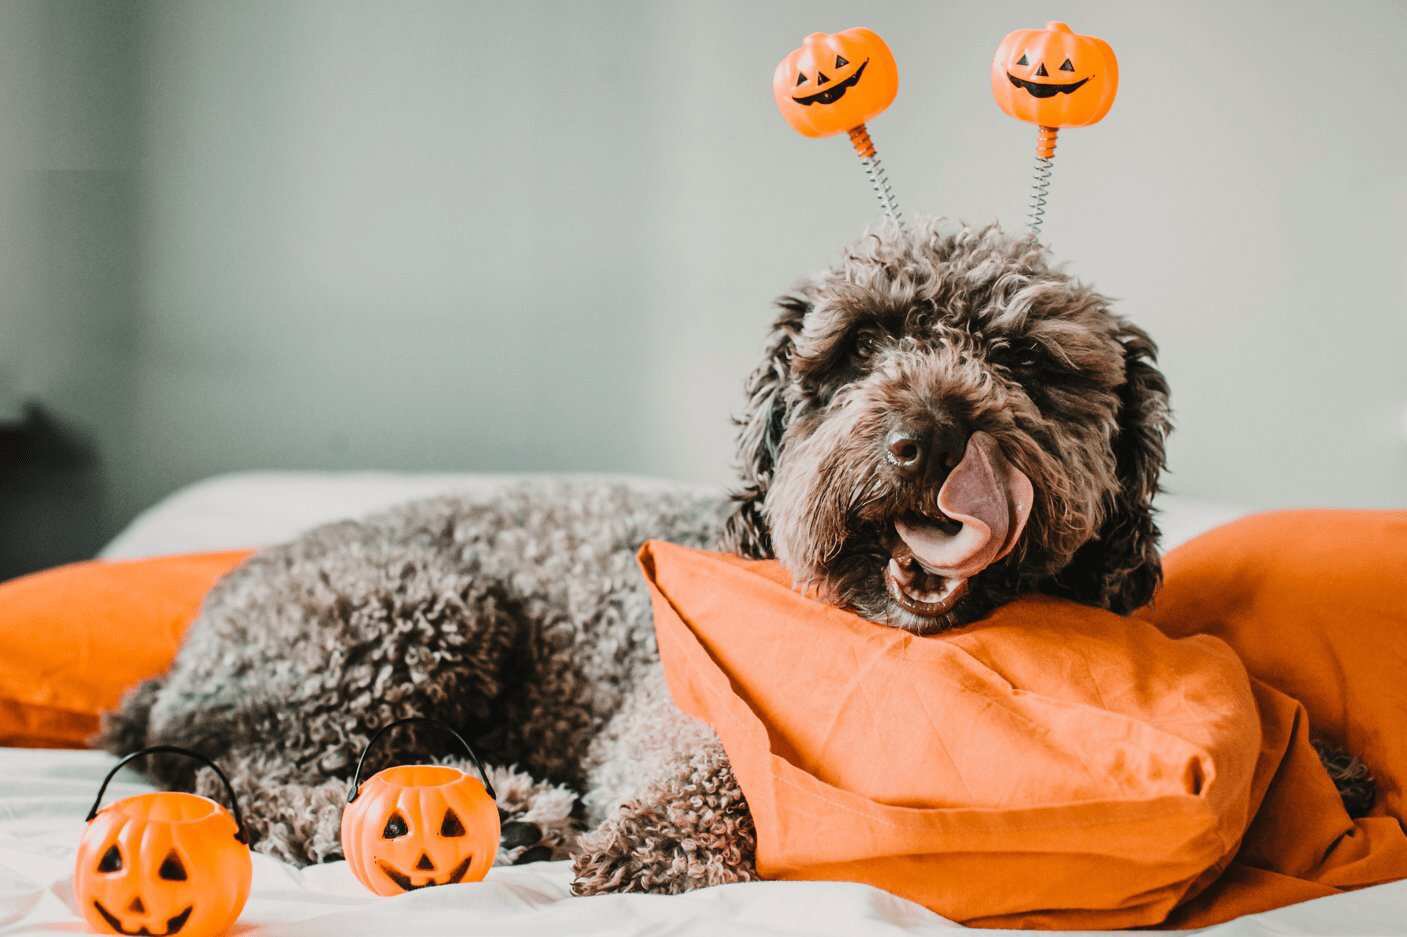 Keep Candy Away From Pets